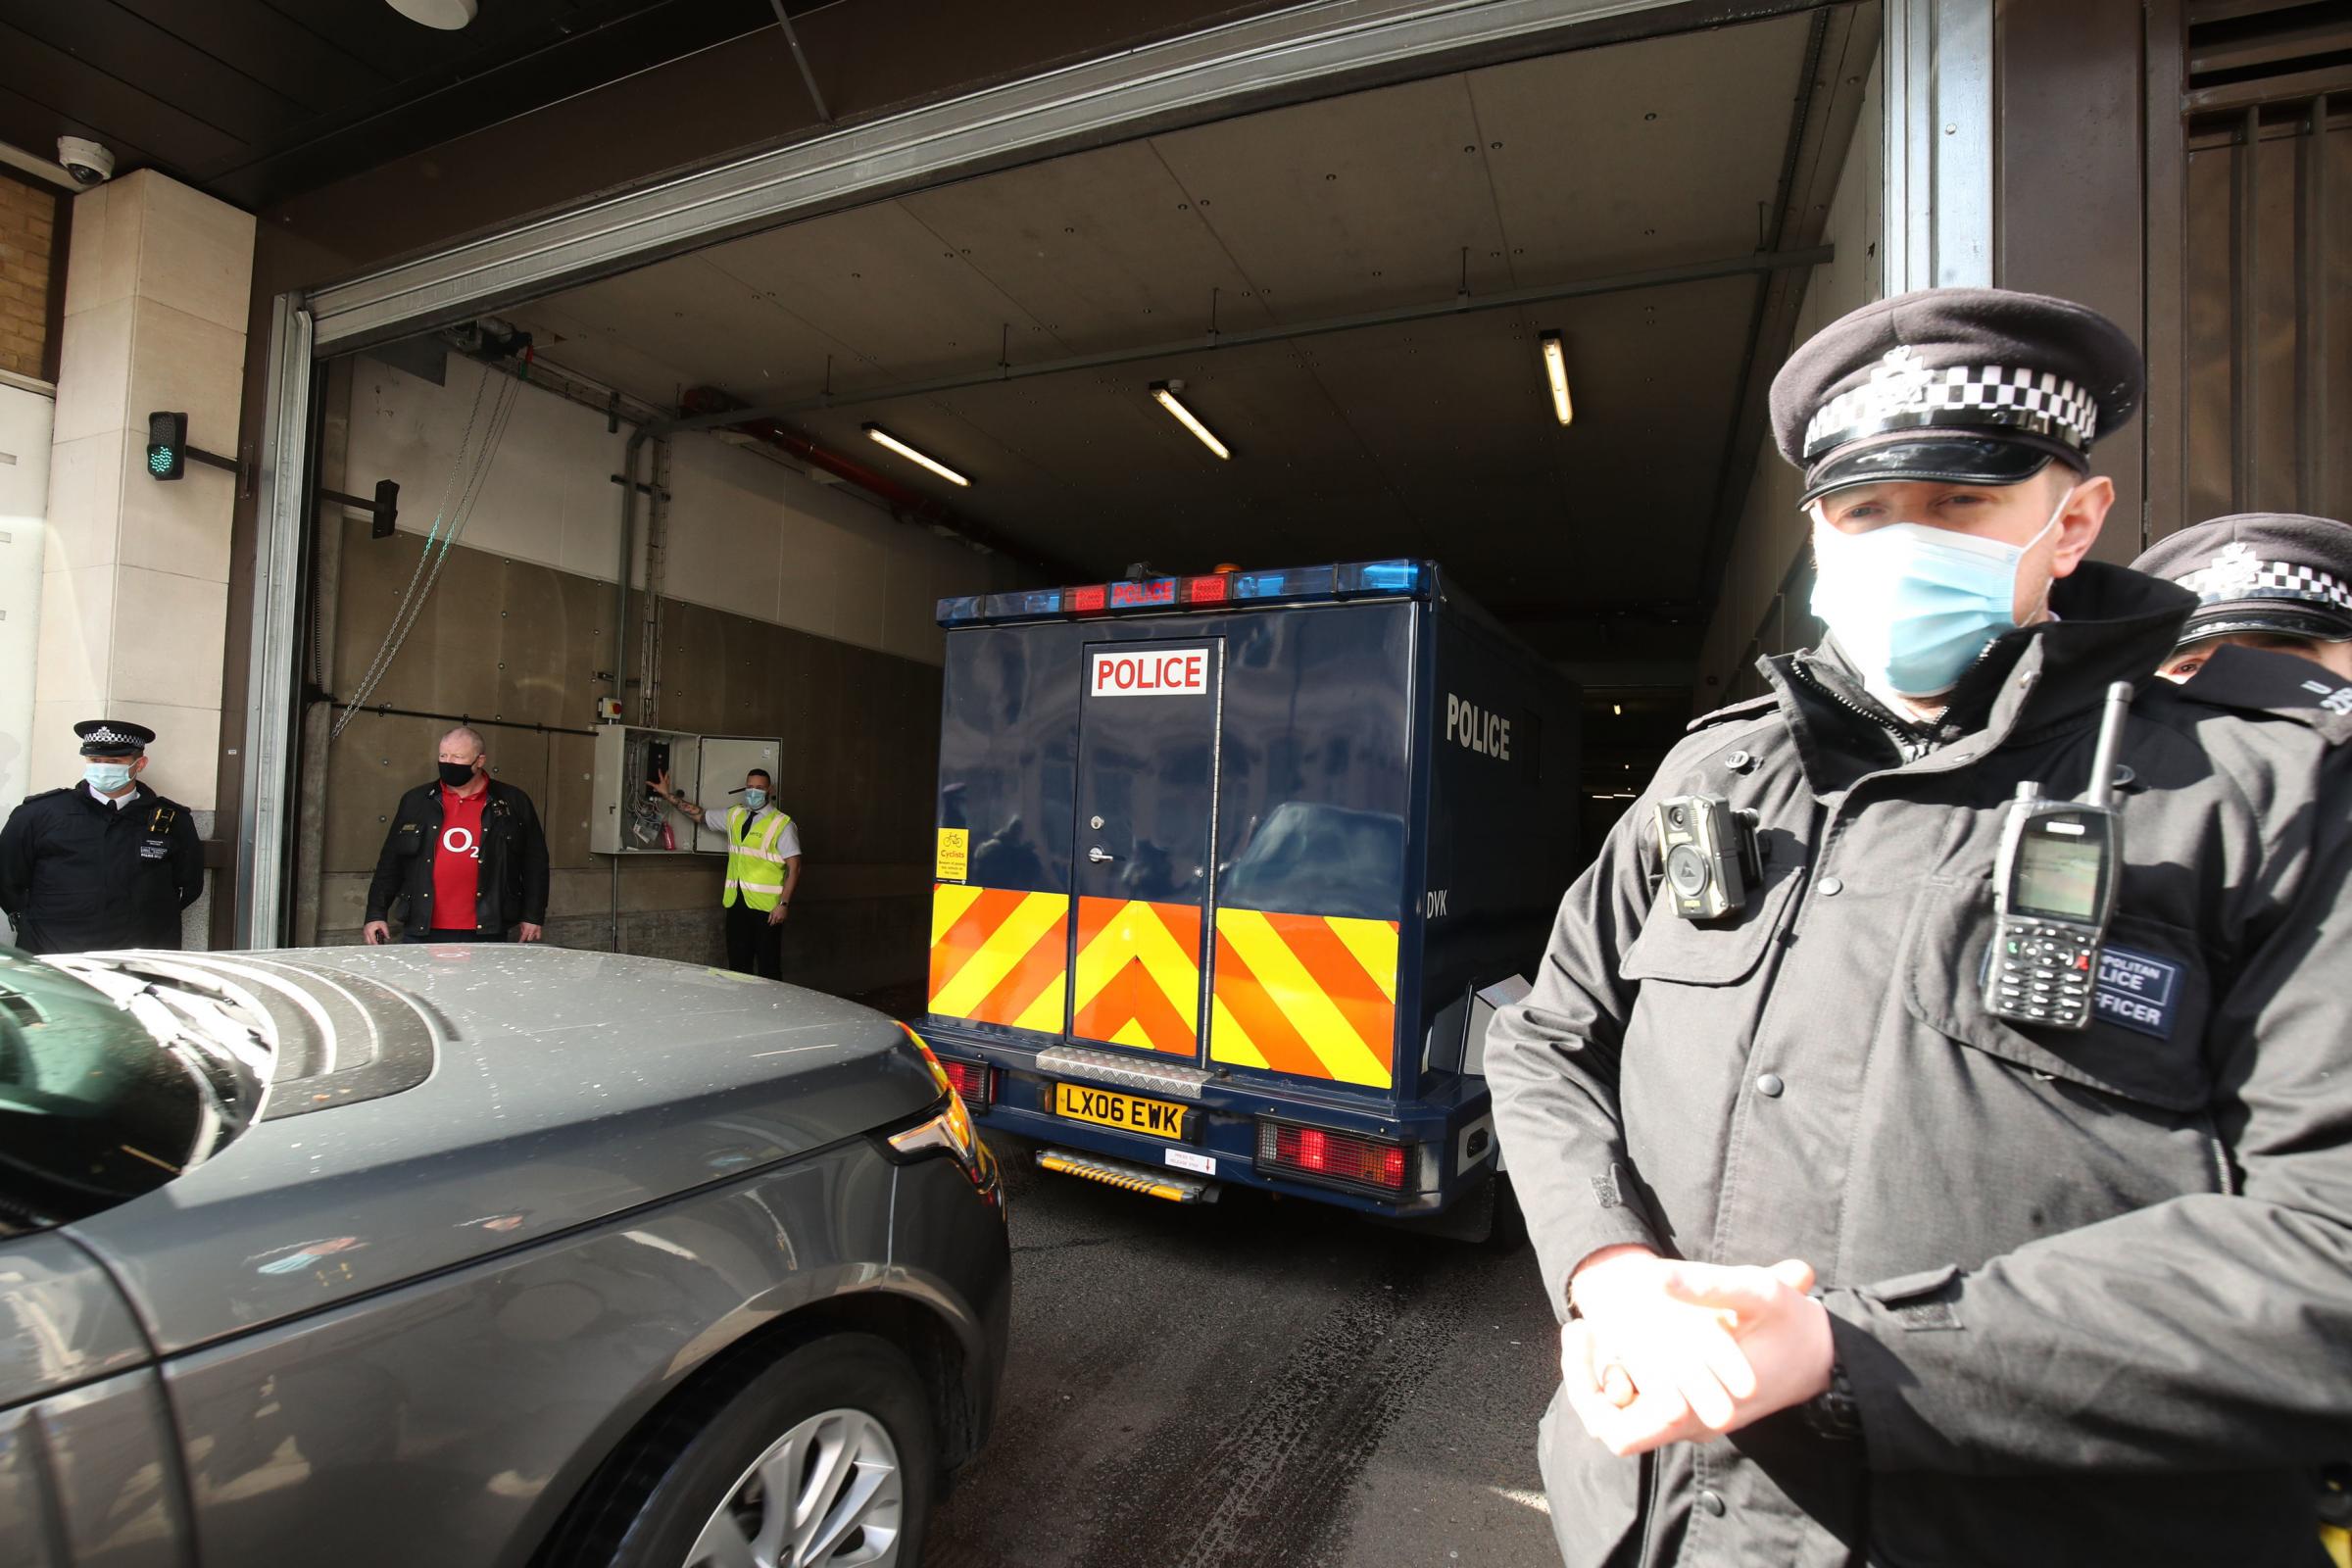 A police van arrives at Westminster Magistrates Court, in London, where serving police constable Wayne Couzens is to appear charged with murder and kidnapping related to the death of Sarah Everard. Picture date: Saturday March 13, 2021. PA Photo.